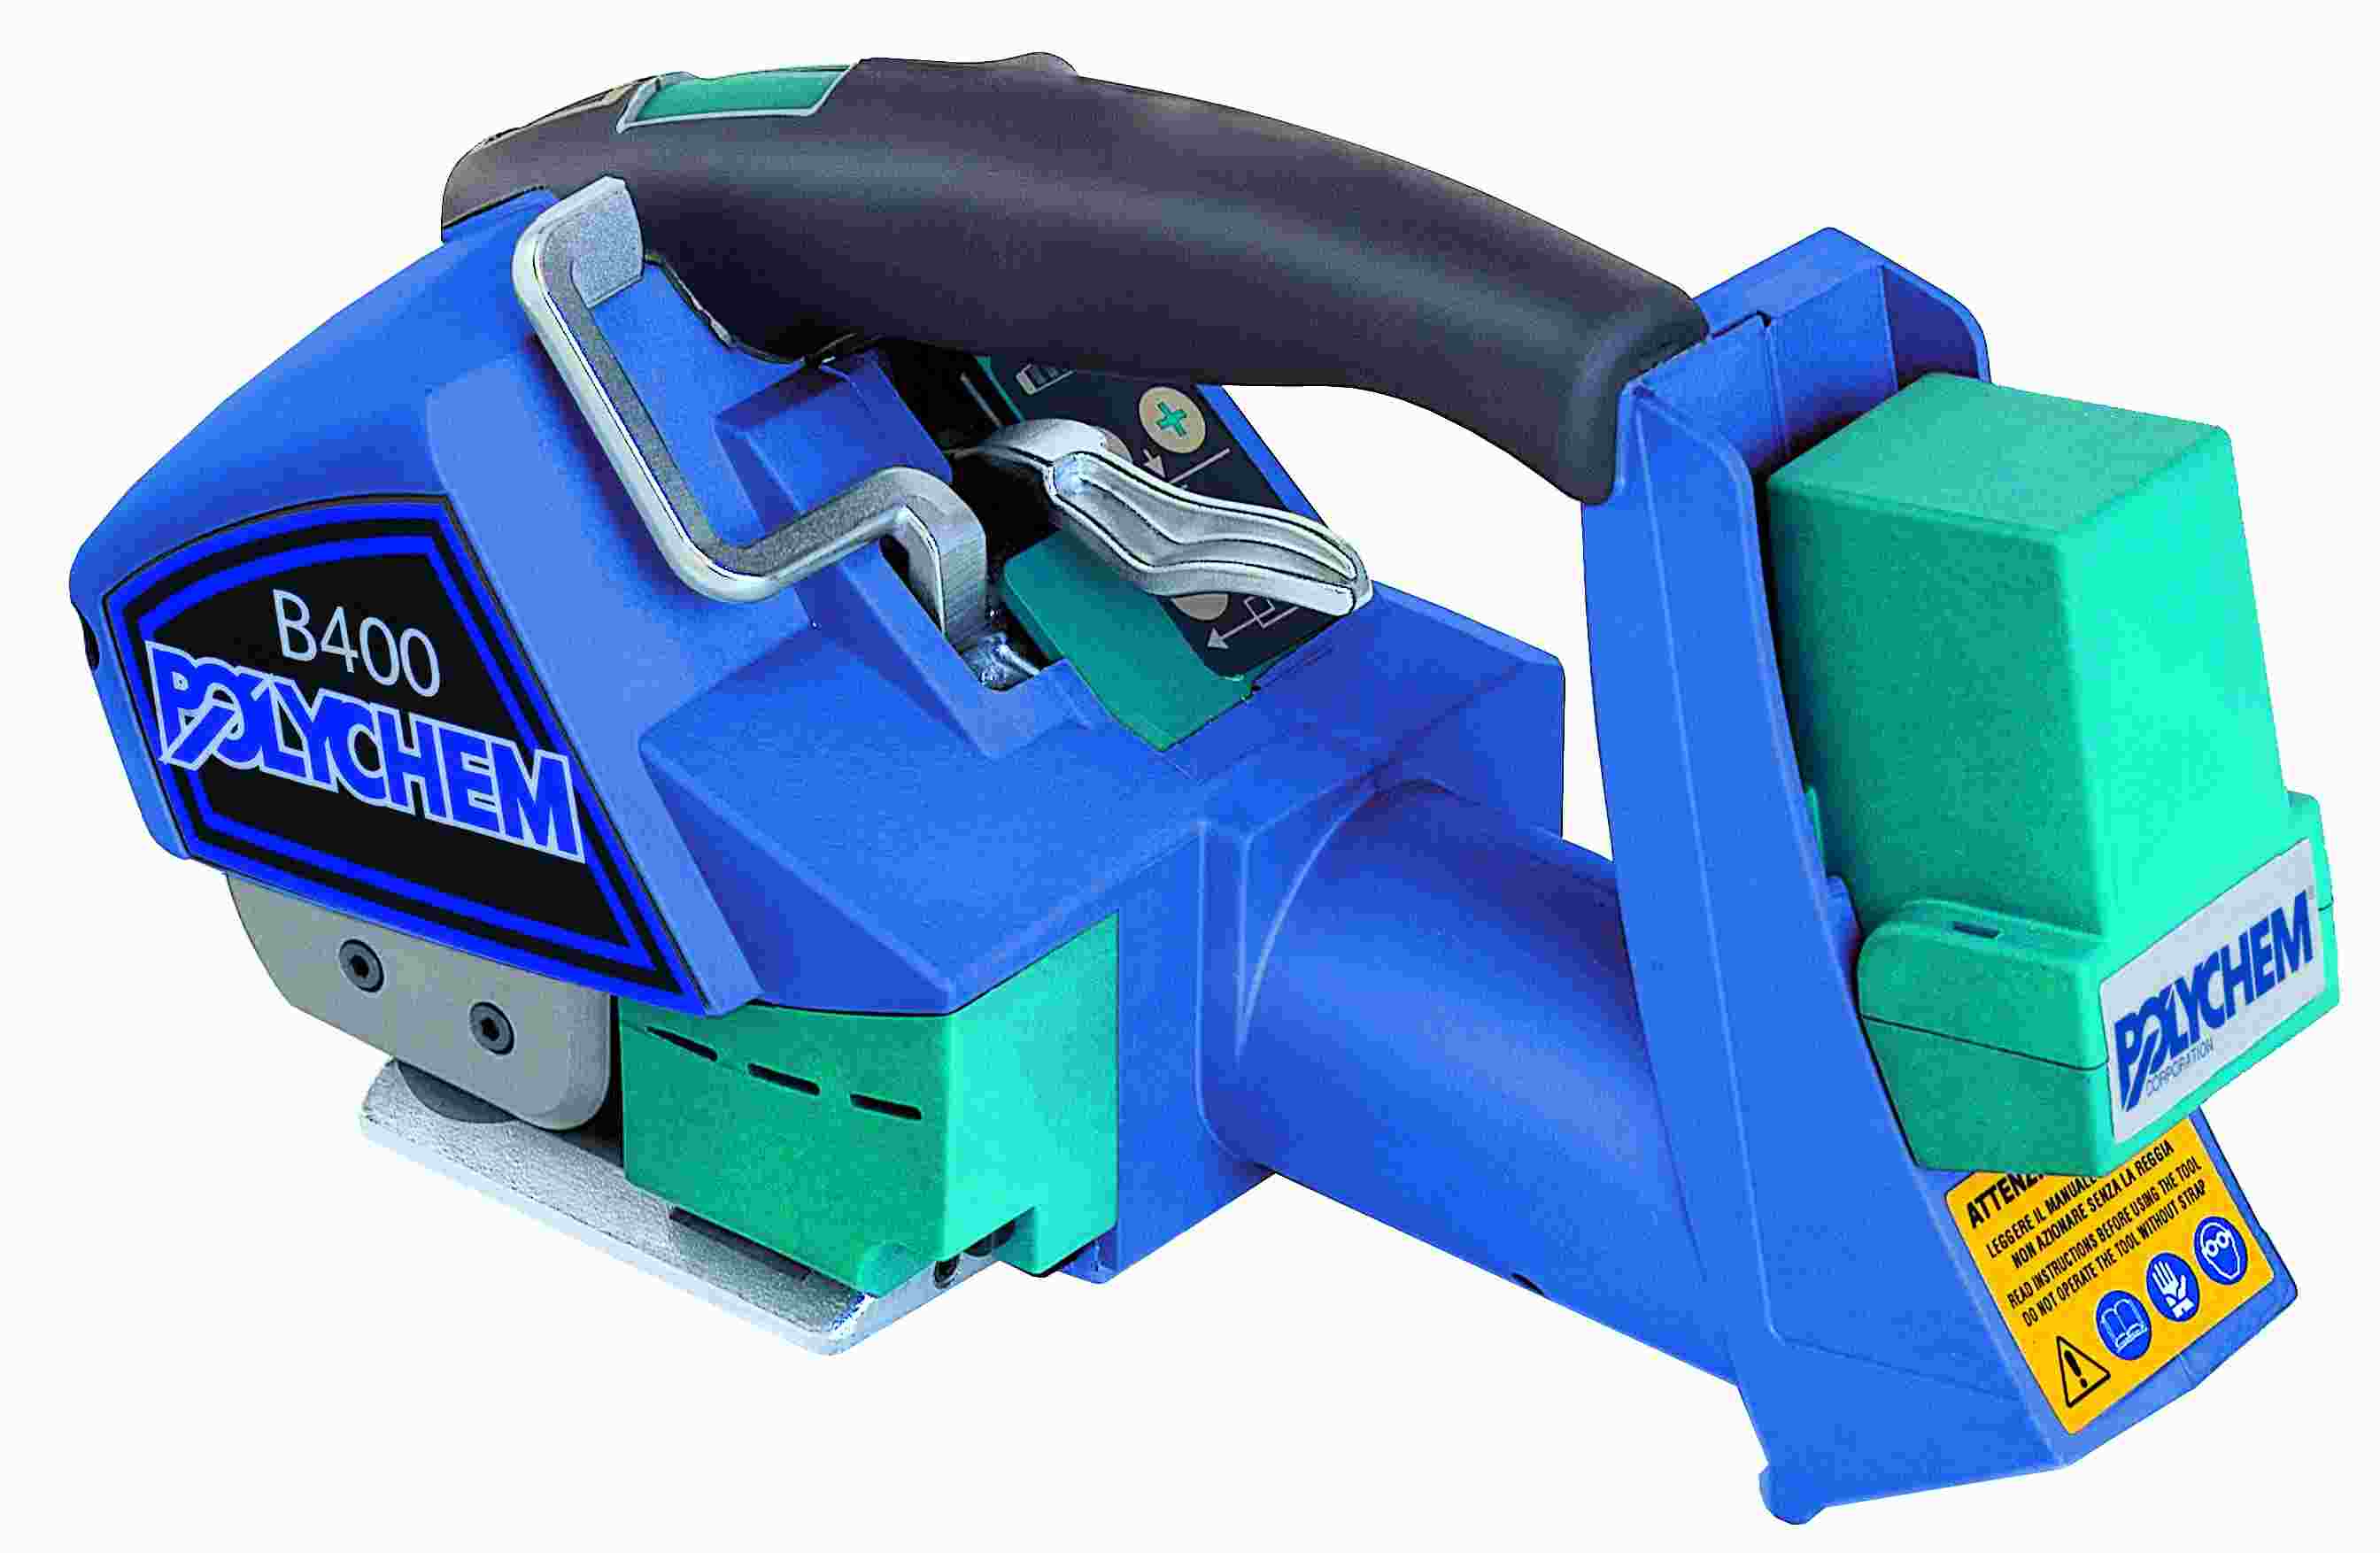  Battery Powered Friction Weld Tool - B400